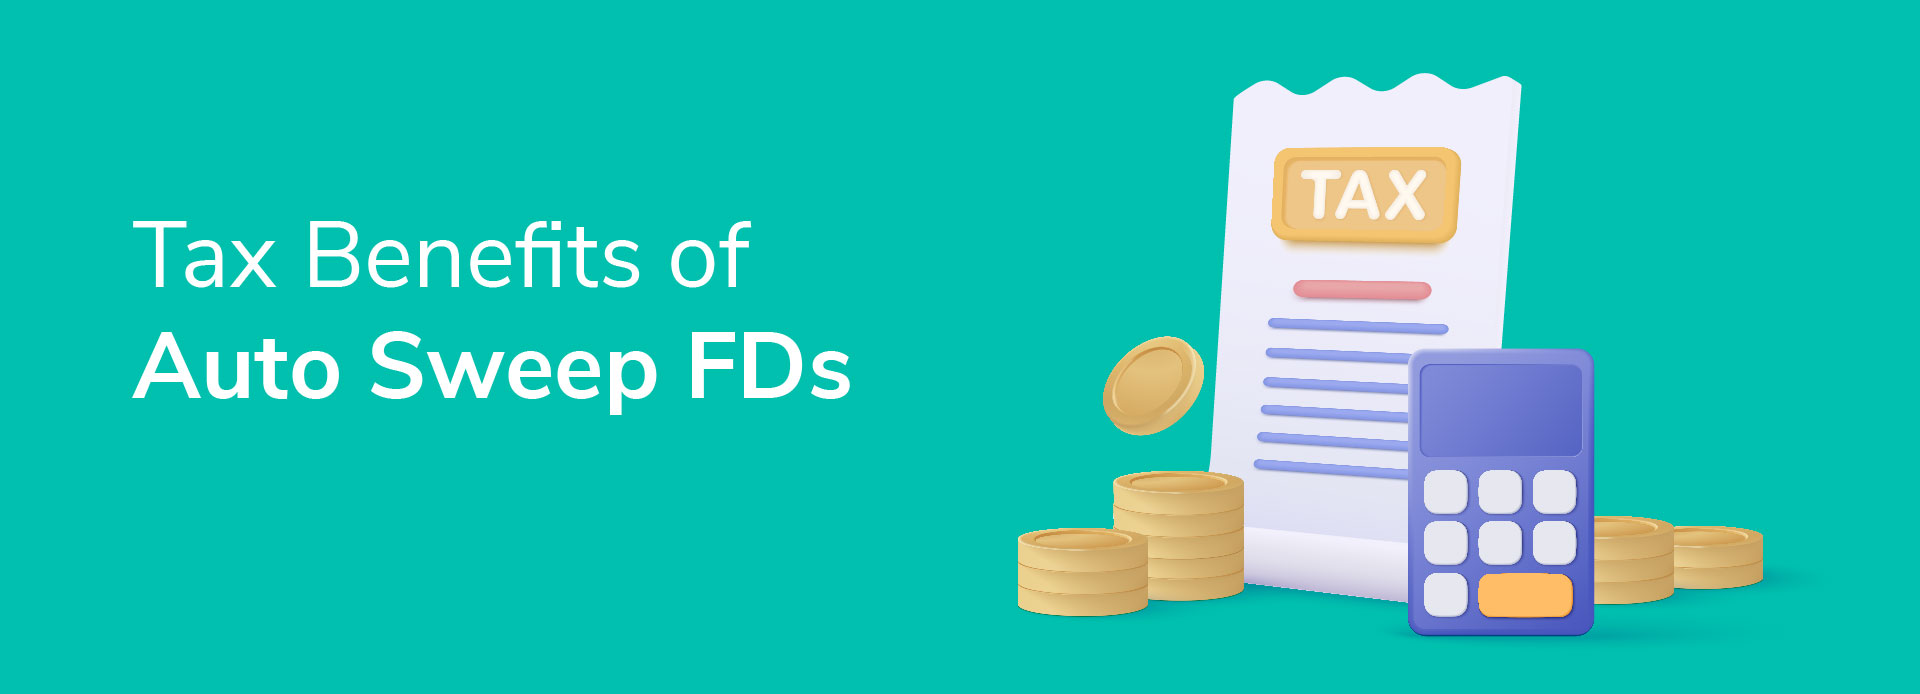 Exploring the Tax Benefits of Auto Sweep FDs